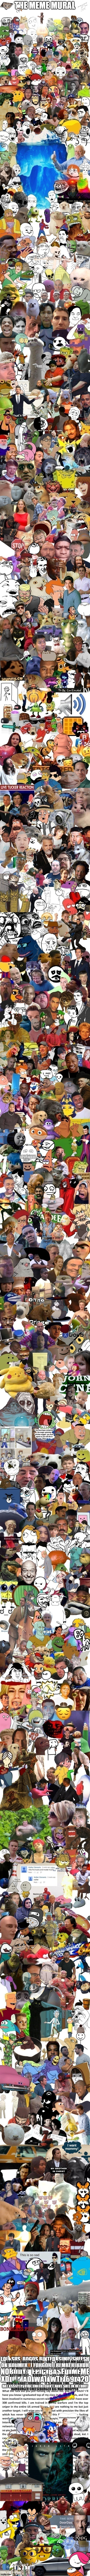 The Meme Mural | image tagged in memes | made w/ Imgflip meme maker